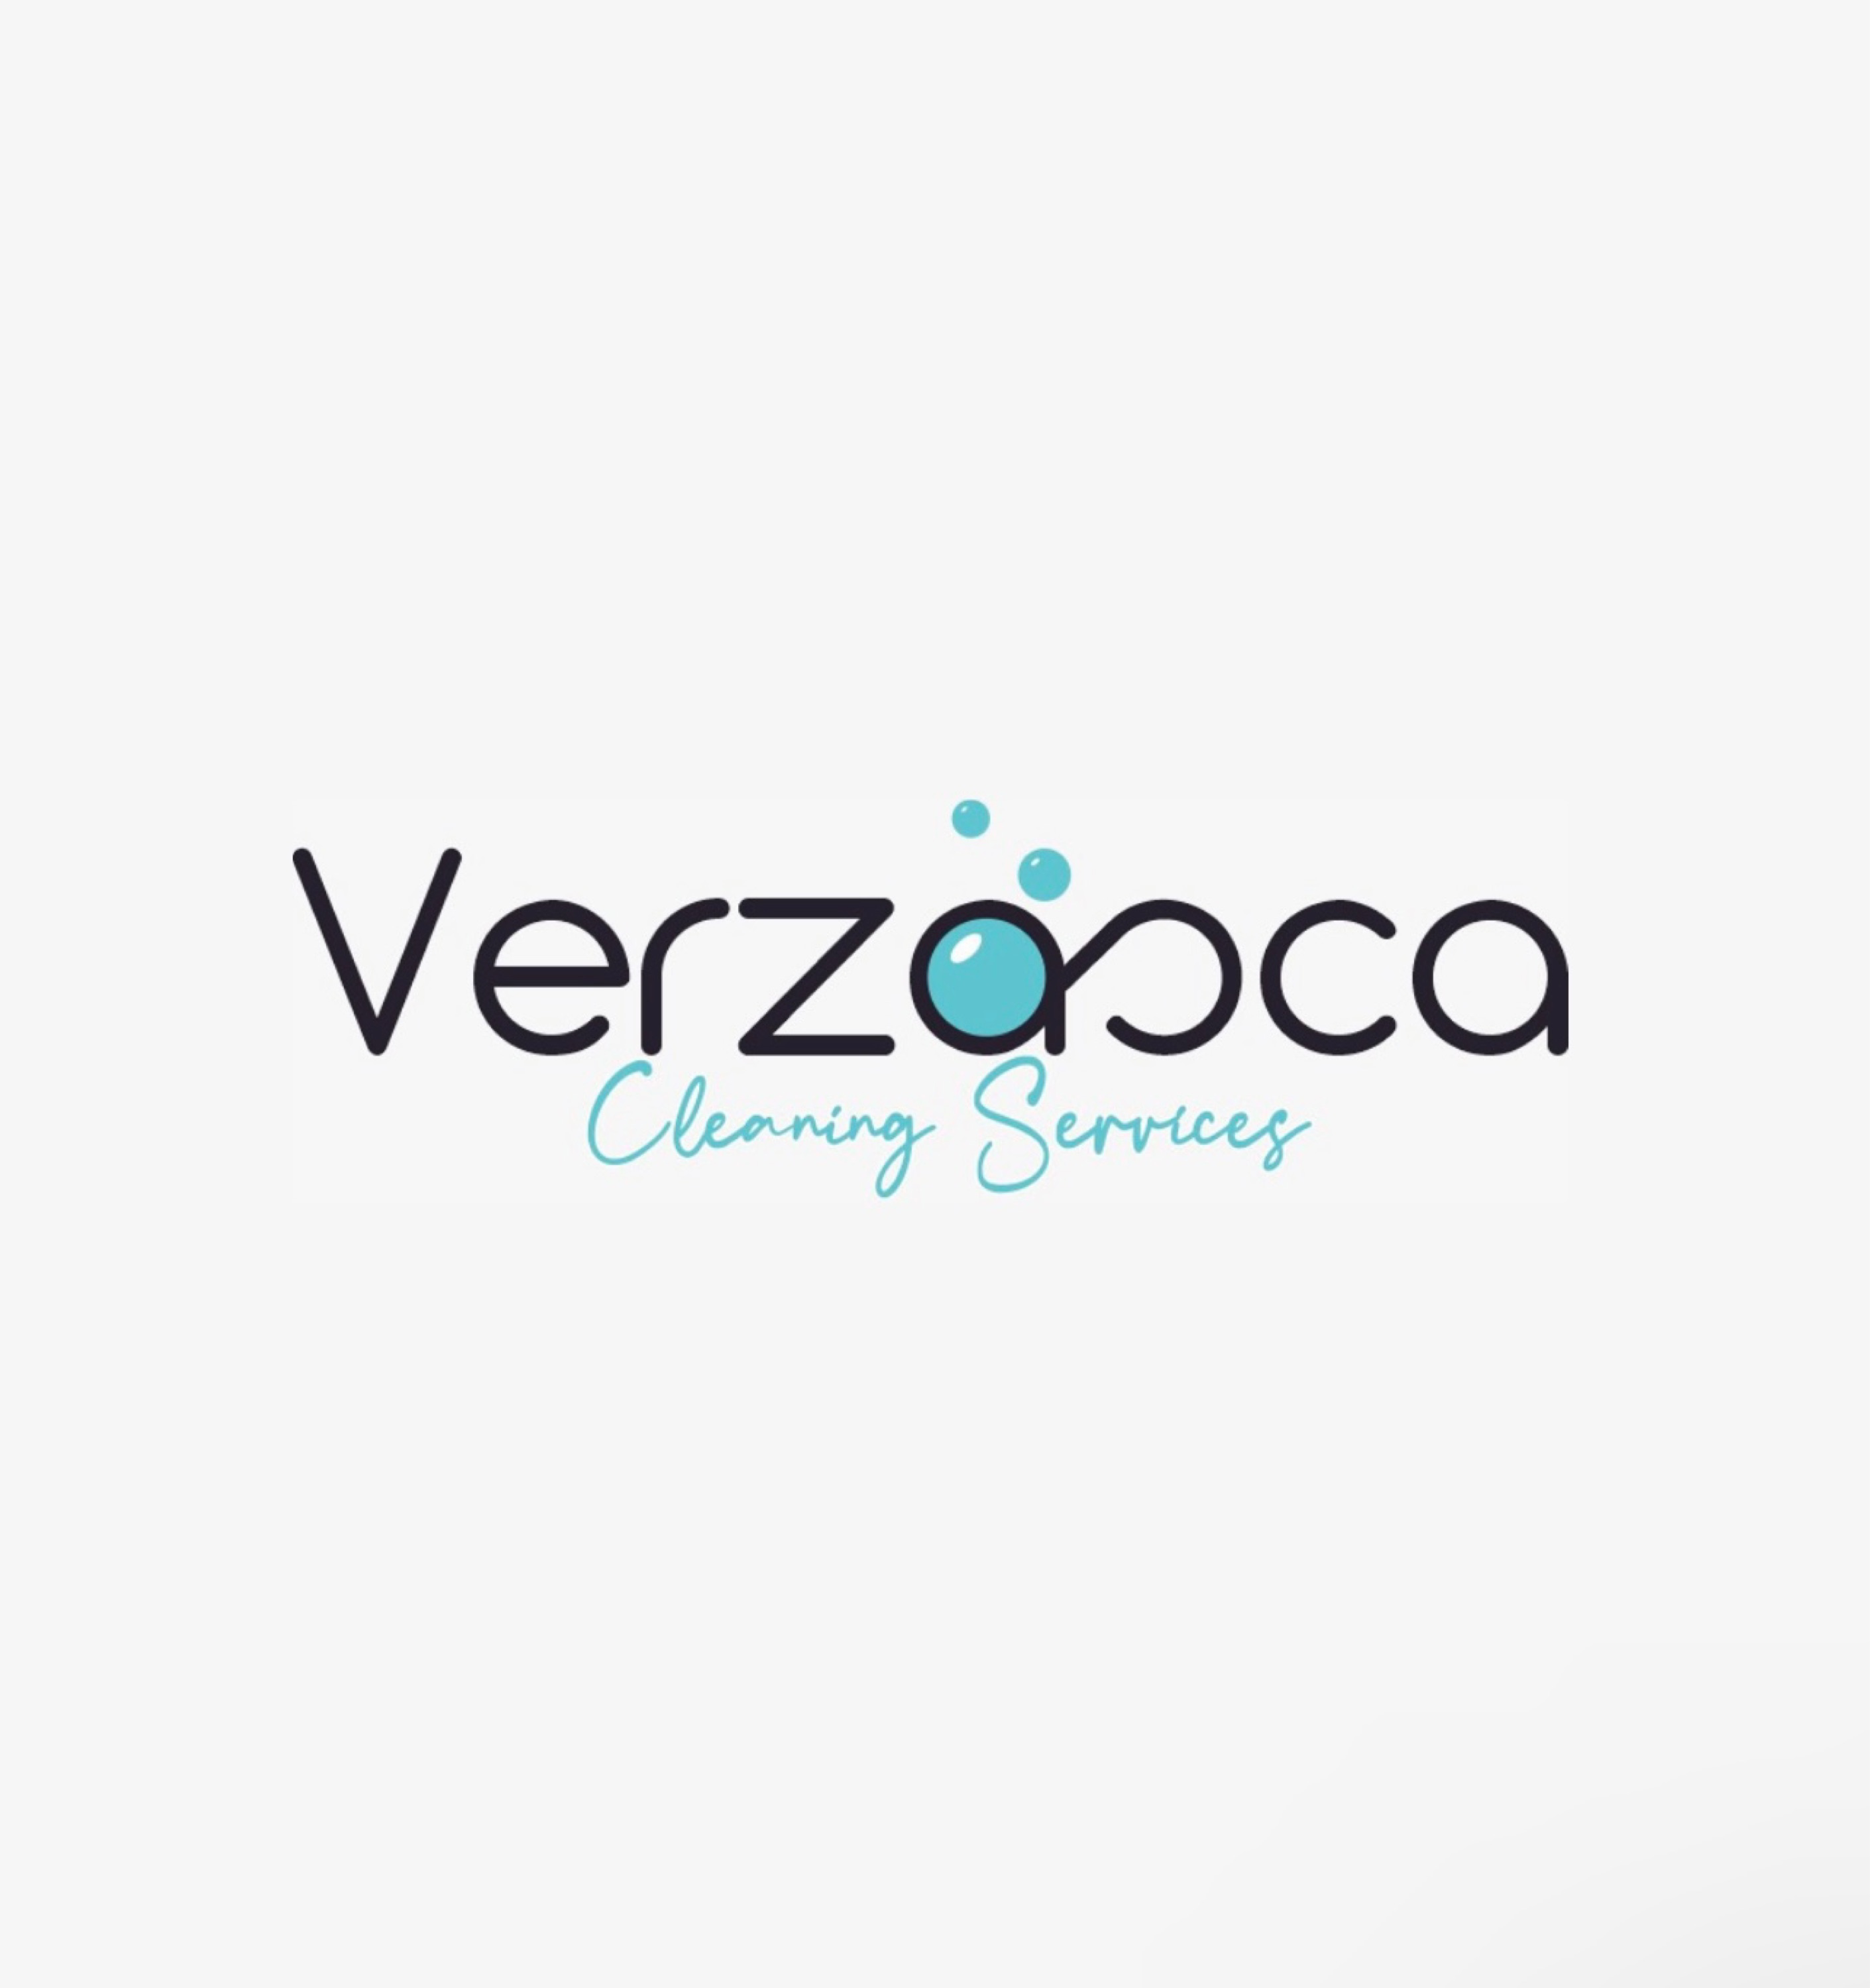 Verzasca Cleaning Services LLC Logo